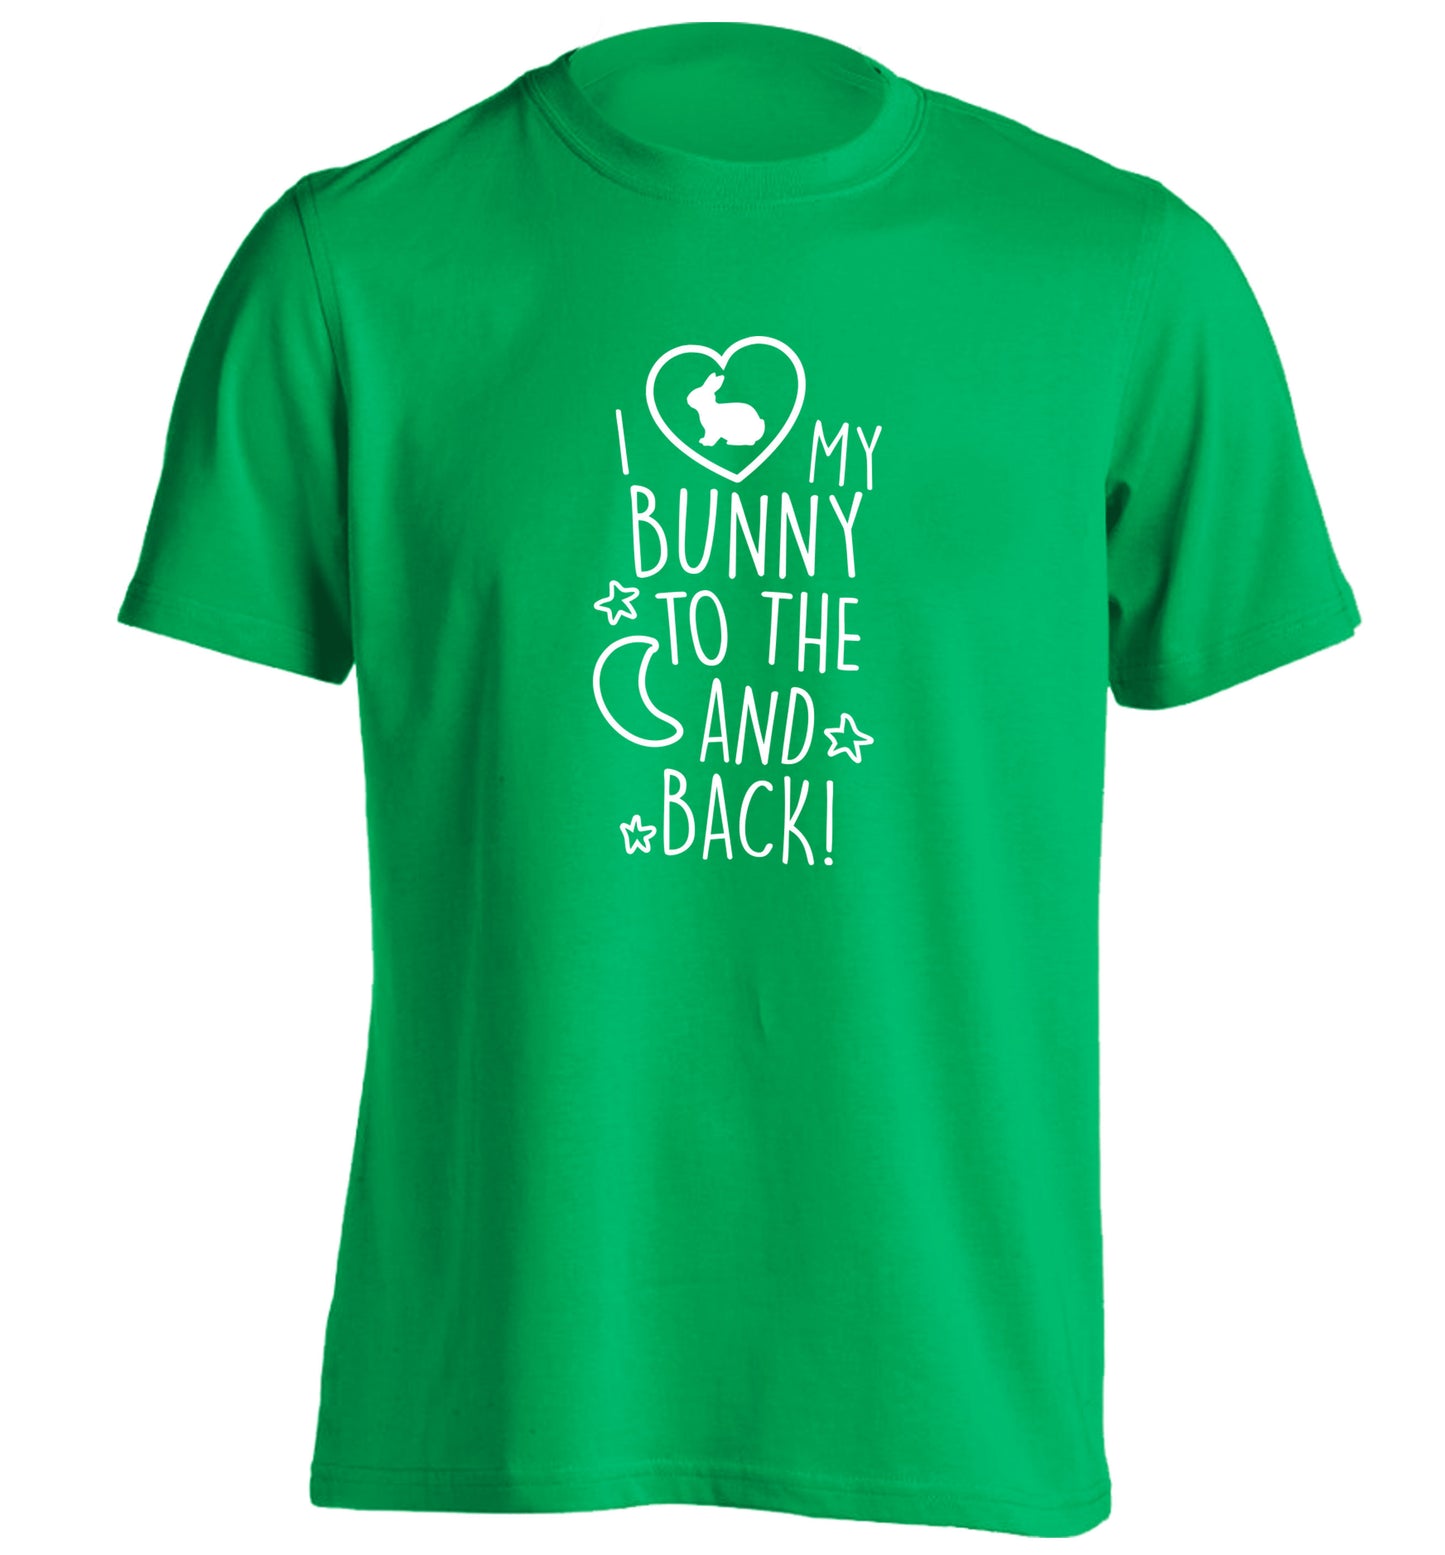 I love my bunny to the moon and back adults unisex green Tshirt 2XL